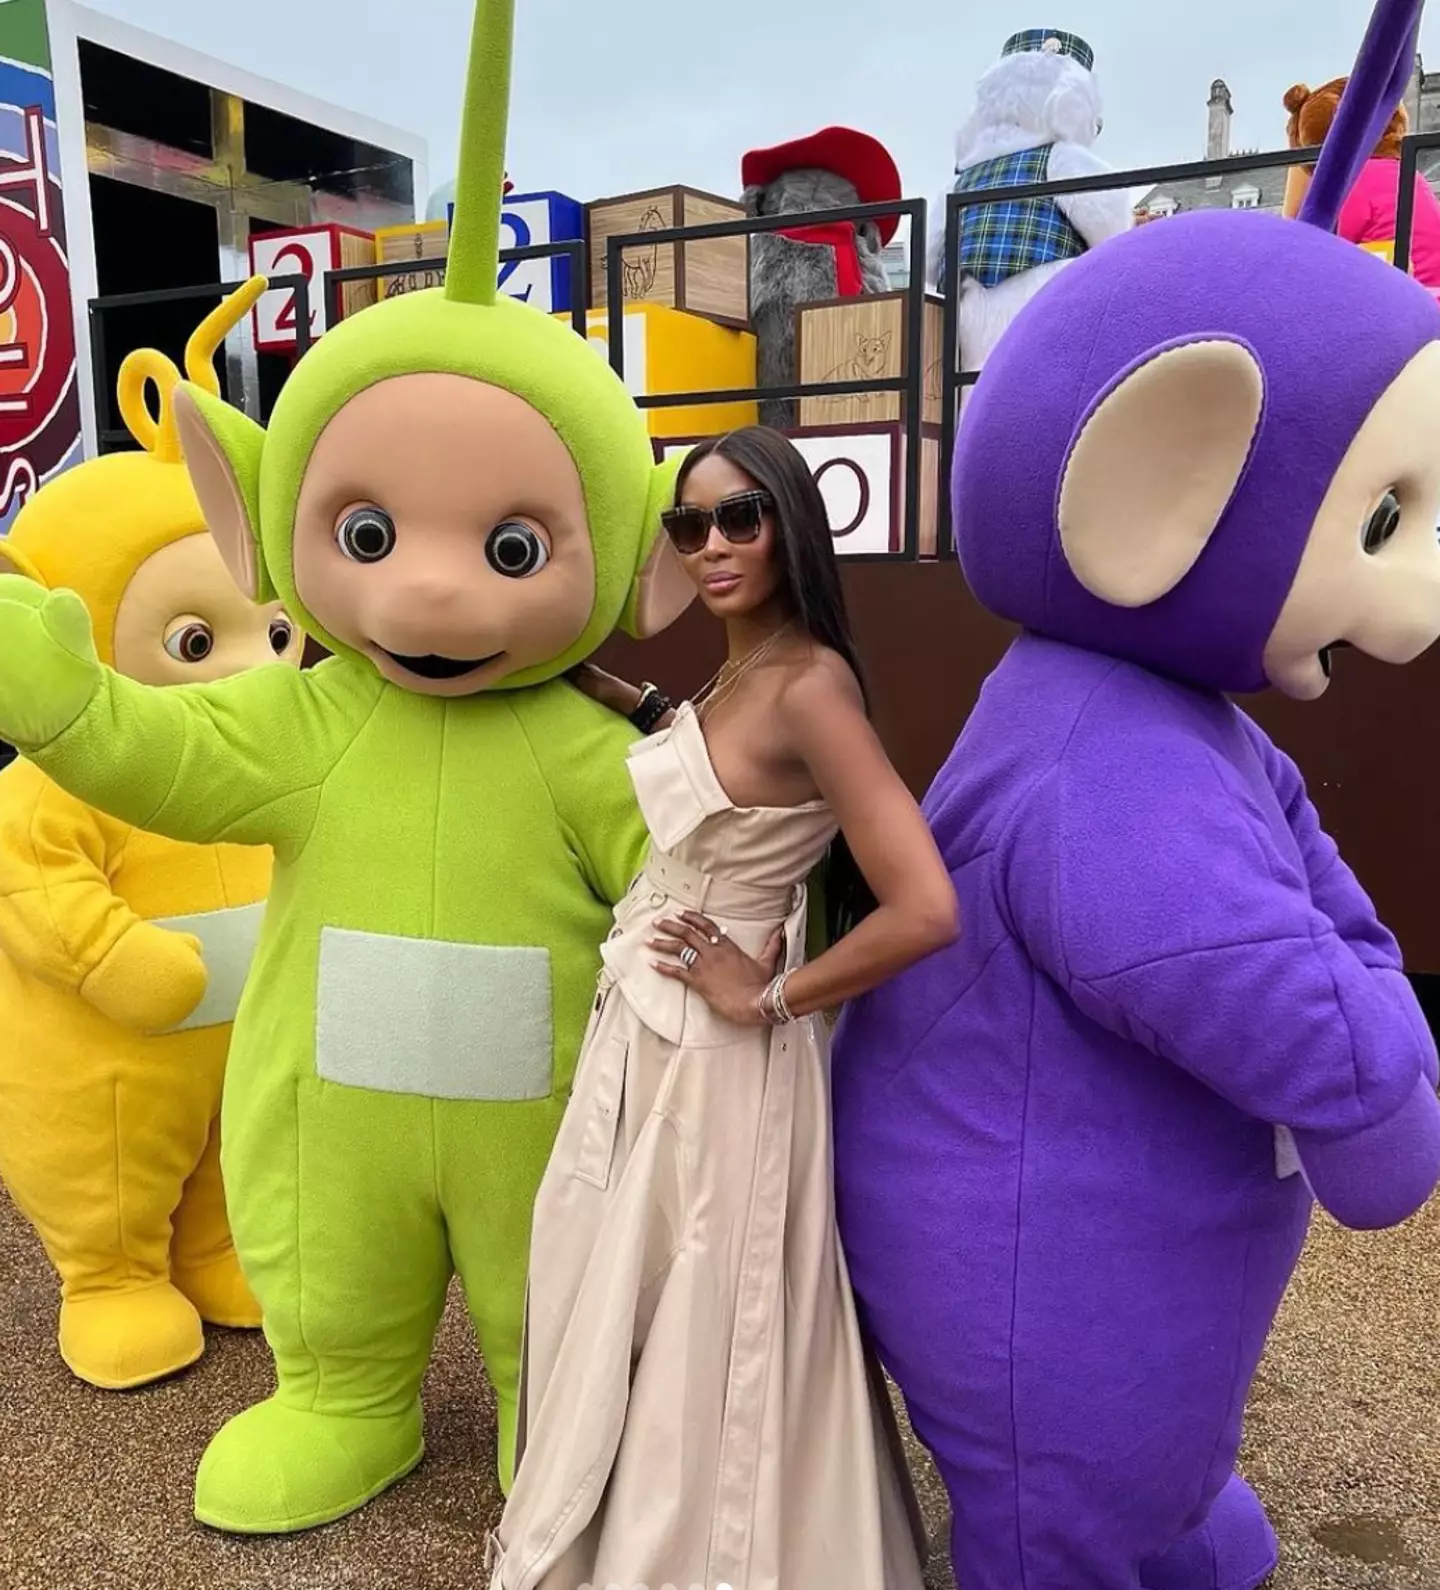 Naomi could be seen posing with the Teletubbies.